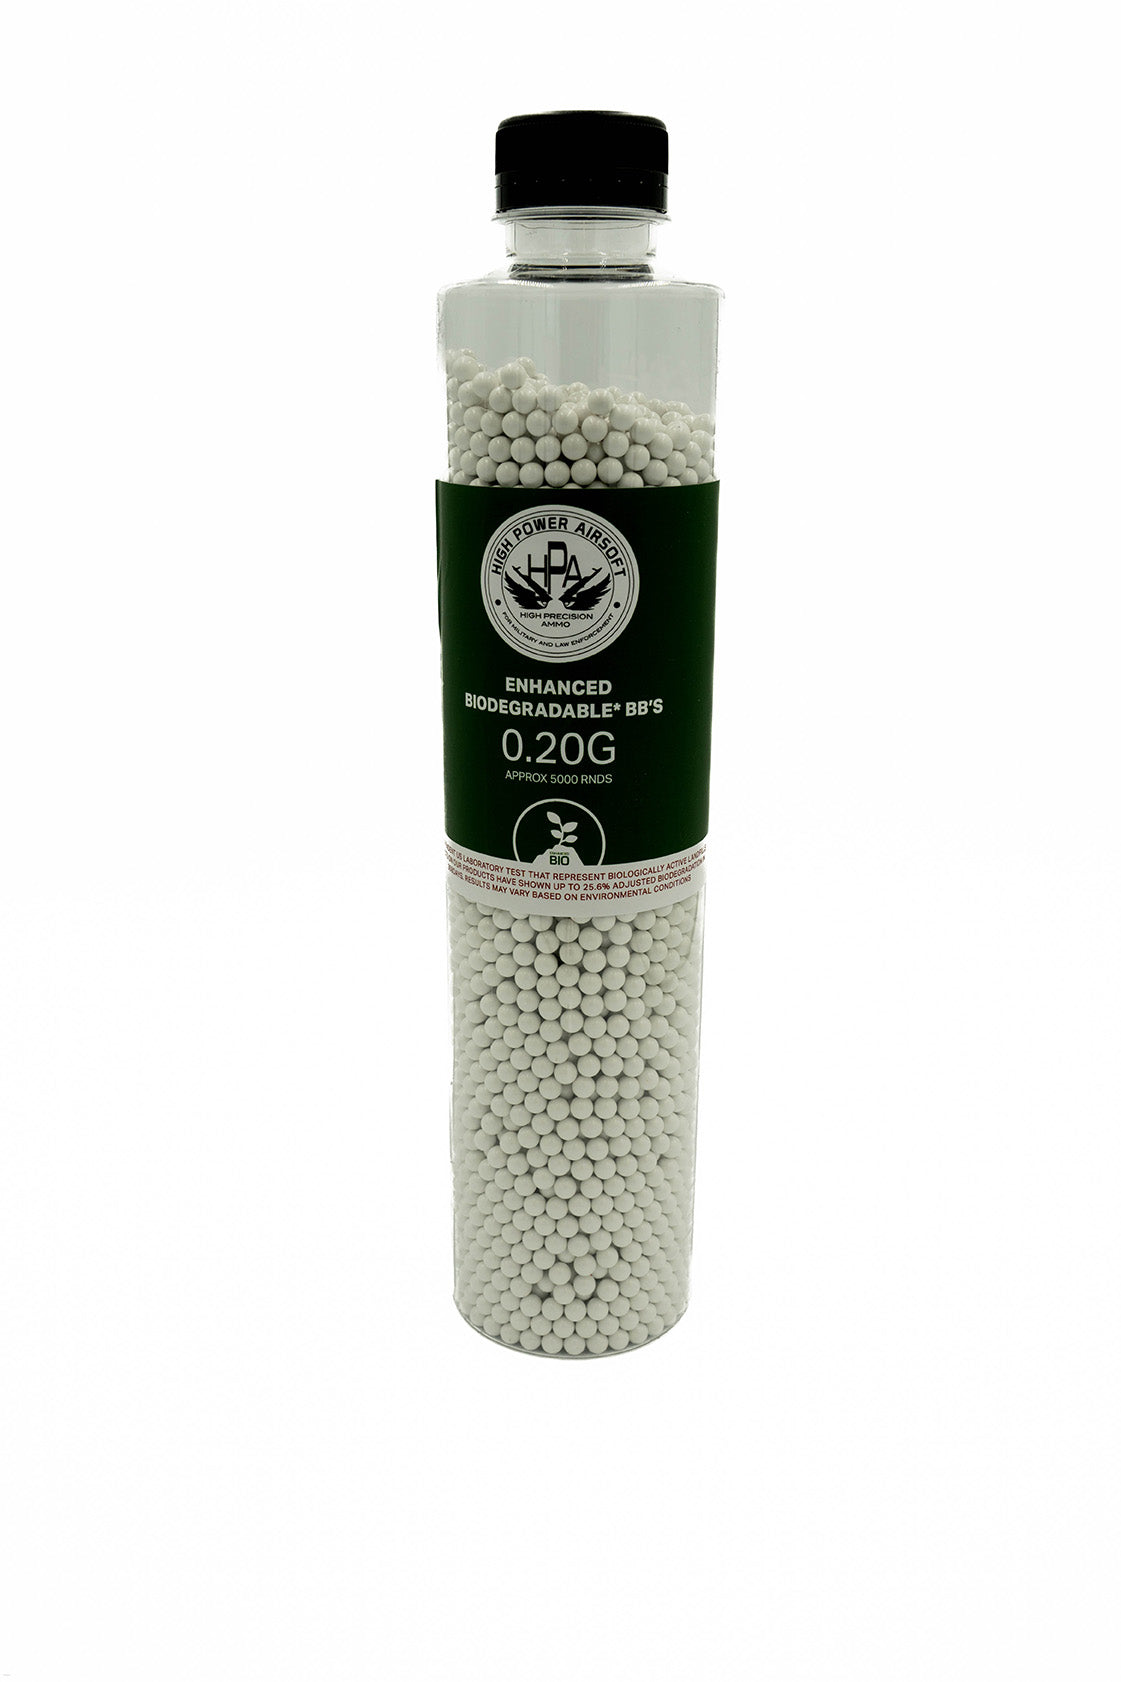 HPA 0.20G Enhanced Biodegradable BB (Approx 5,000rds)